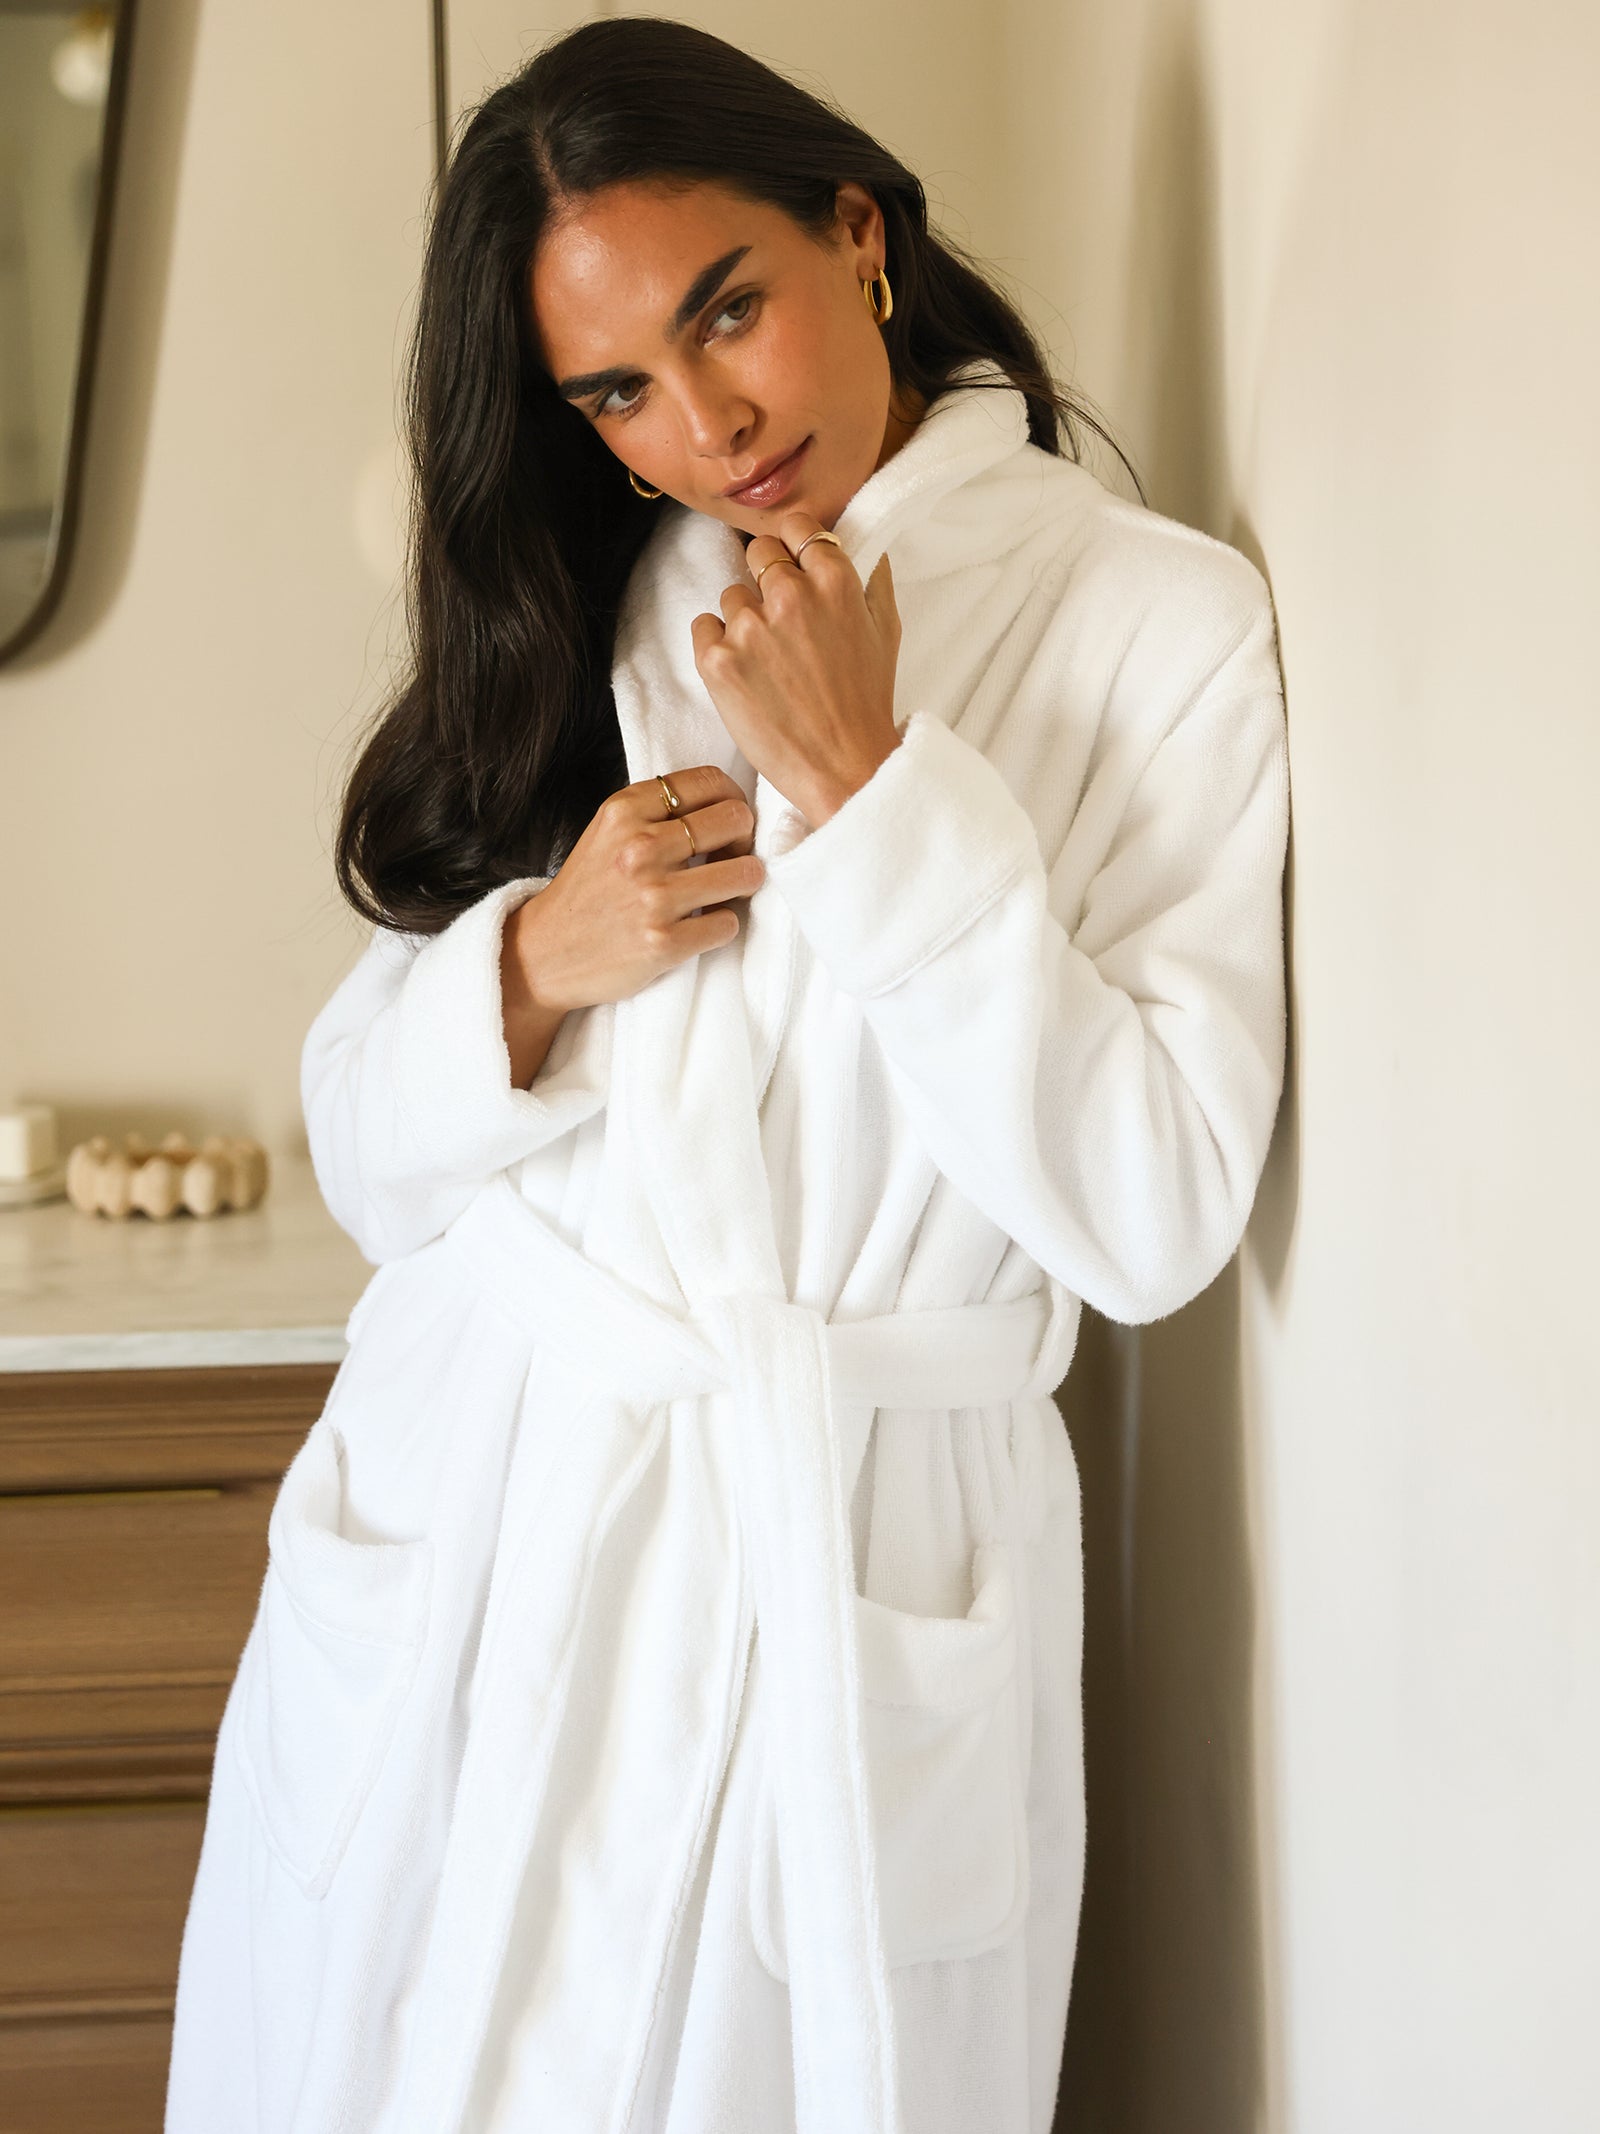 Woman standing in bathroom in white bath robe 